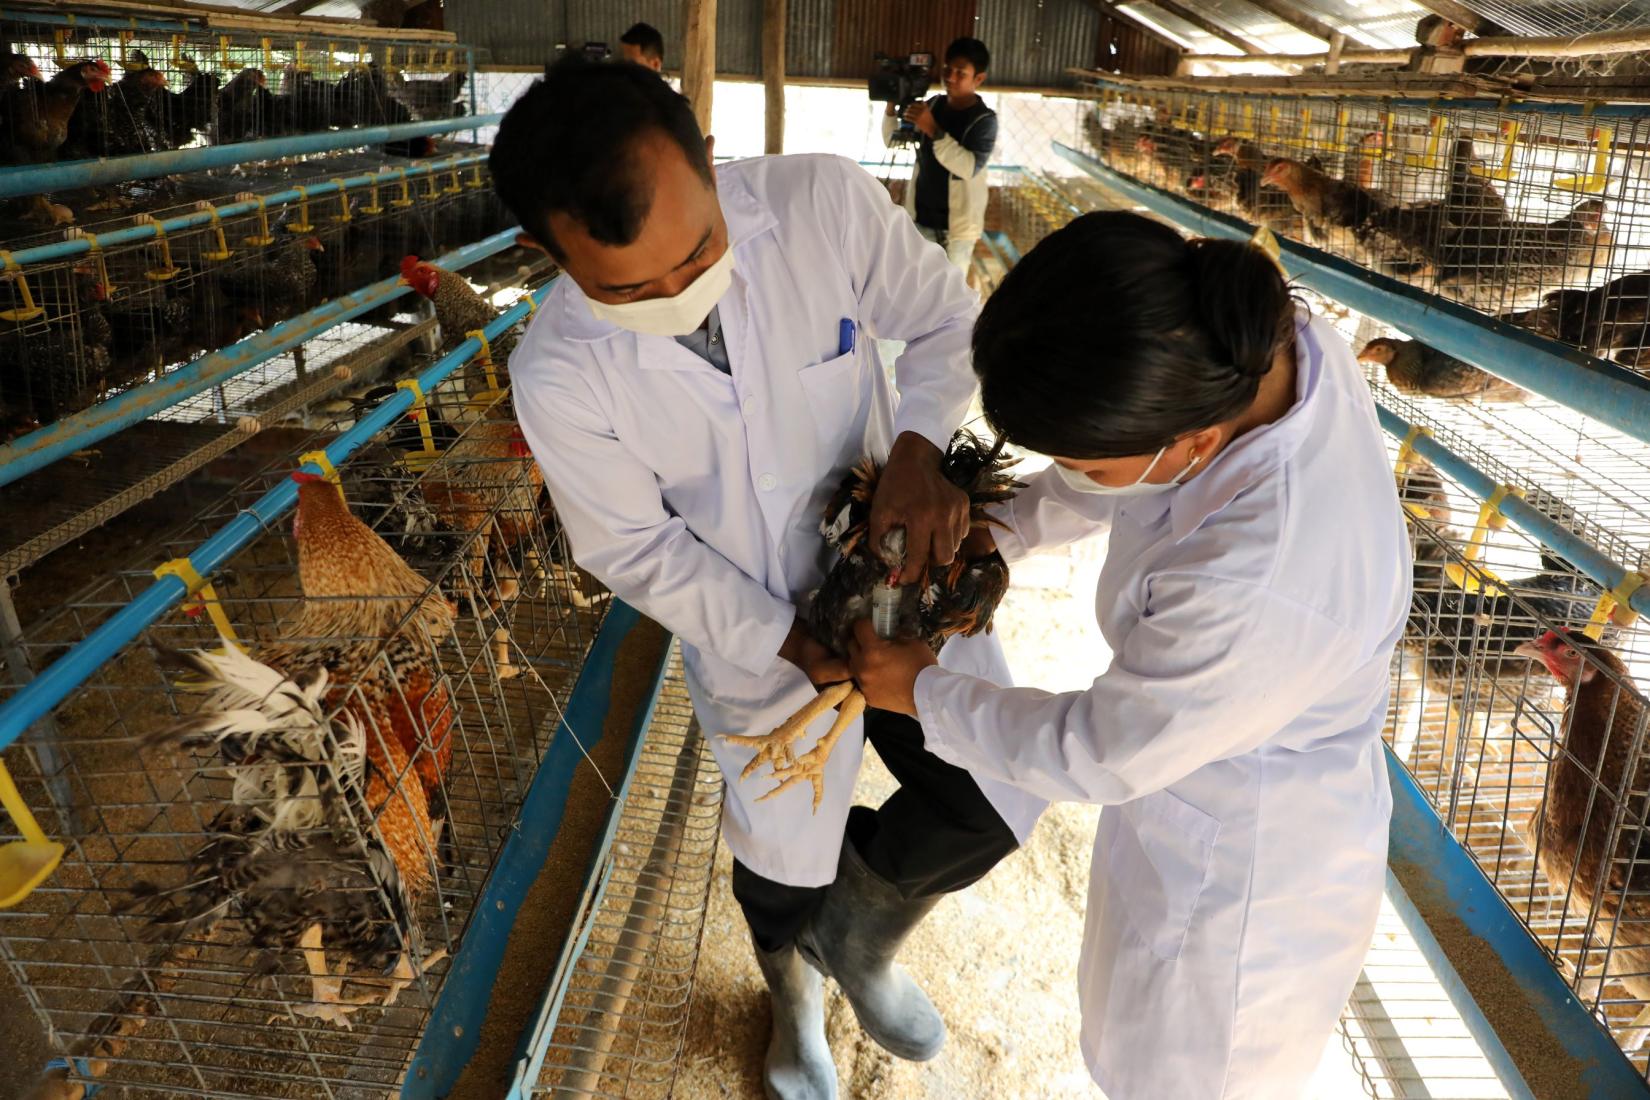 Two people in lab coats inspecting chickens in hatchery